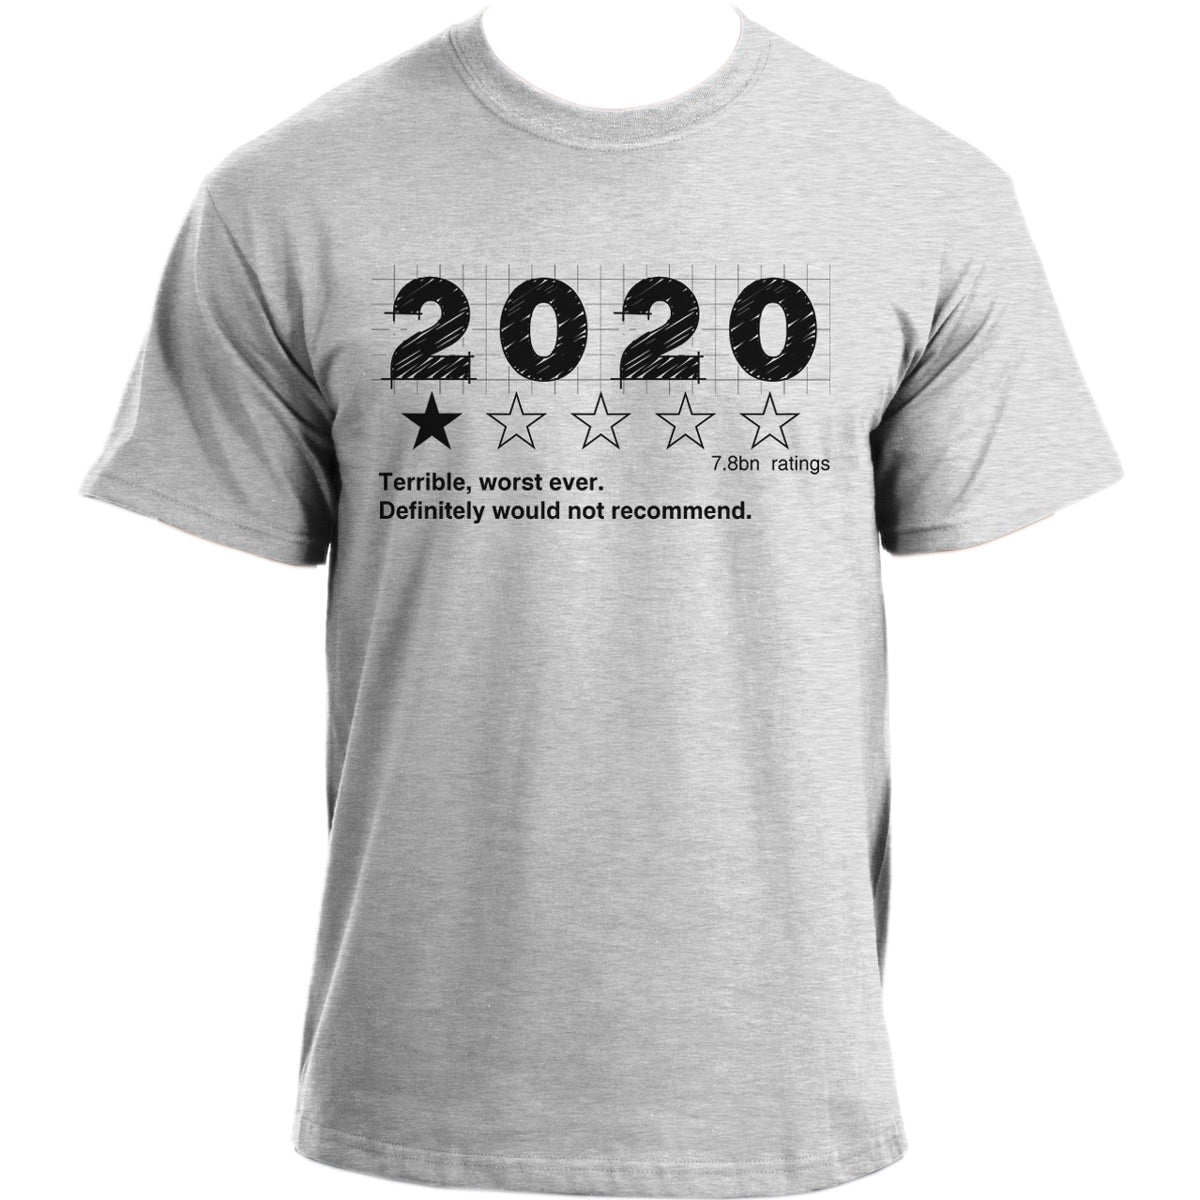 2020 One Star Review T Shirt I One Terrible Year 2020 Funny T-Shirt for Men